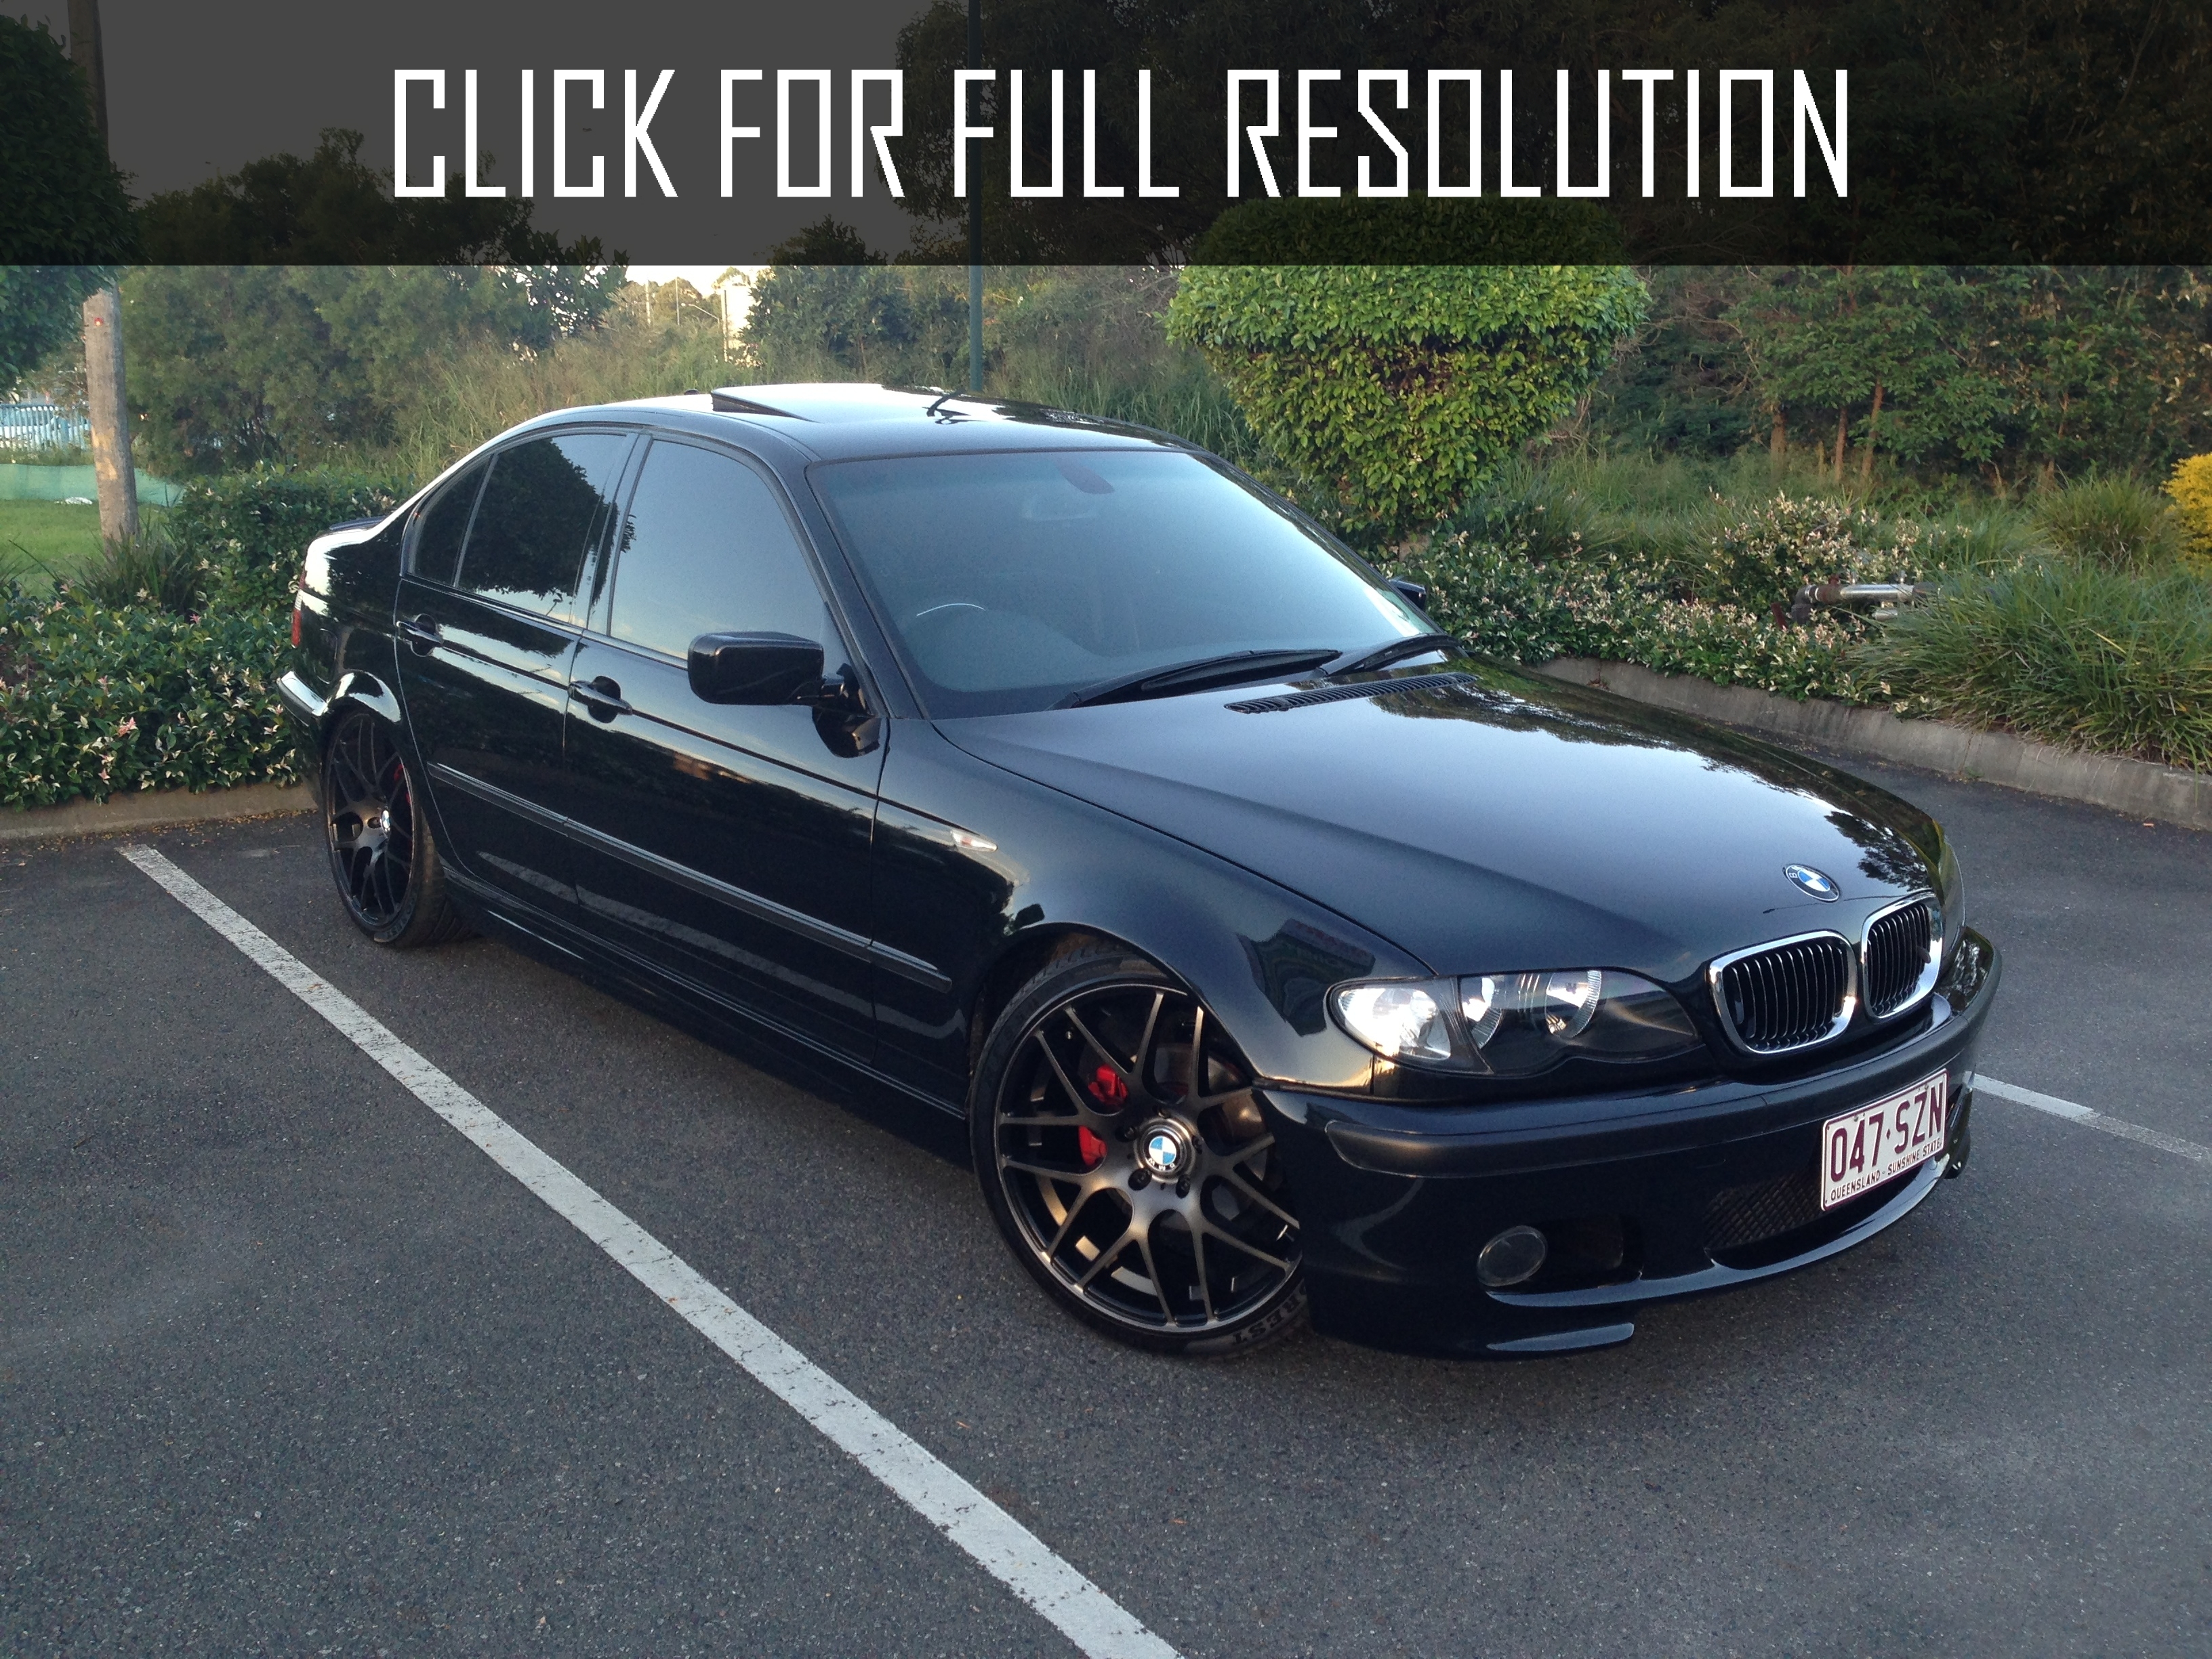 2005 Bmw 318i E46 news, reviews, msrp, ratings with